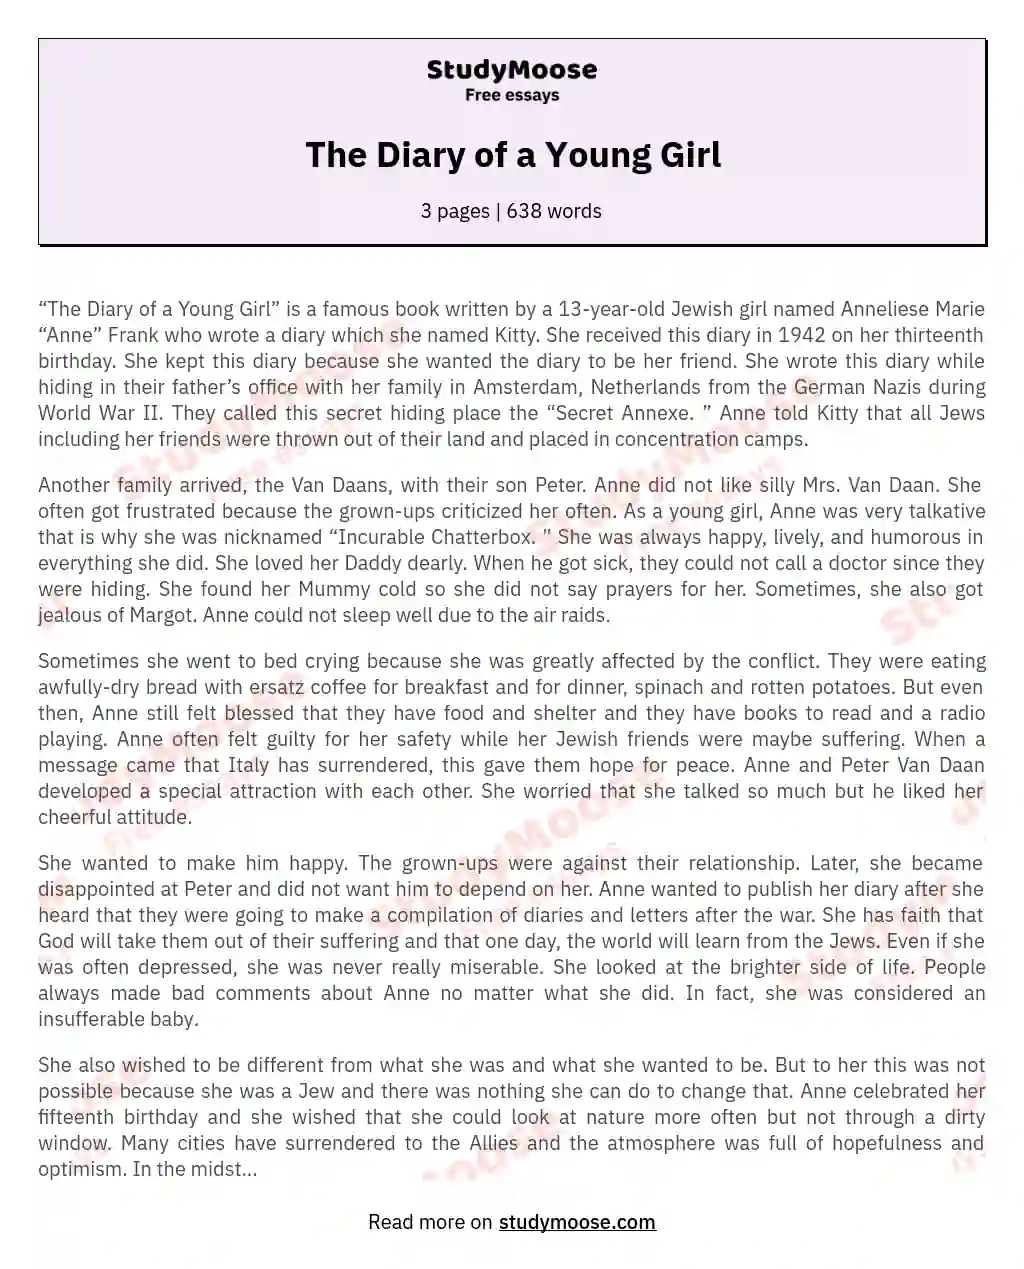 The Diary of a Young Girl essay